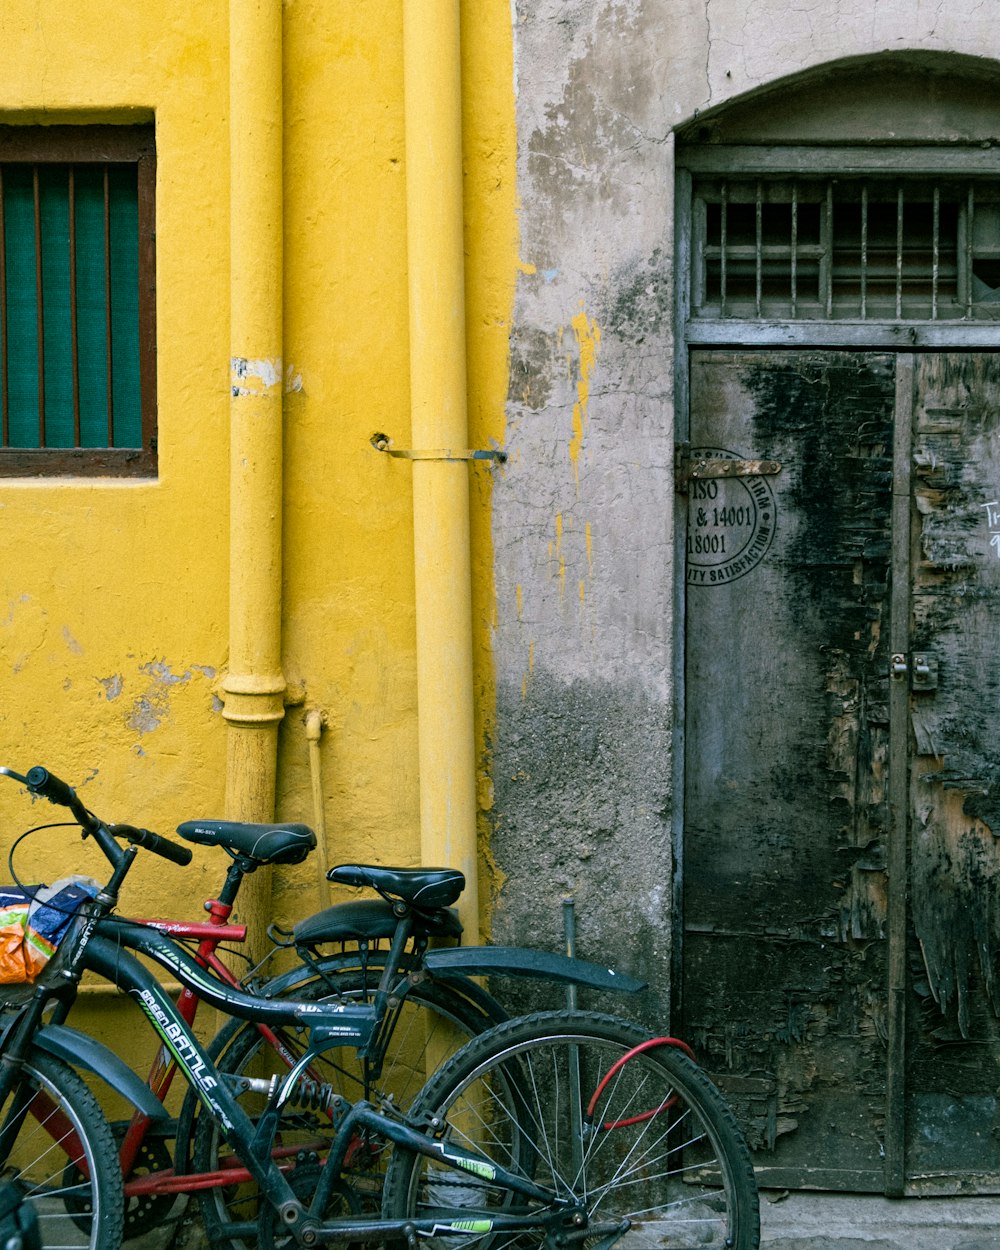 a couple of bikes parked in front of a yellow building